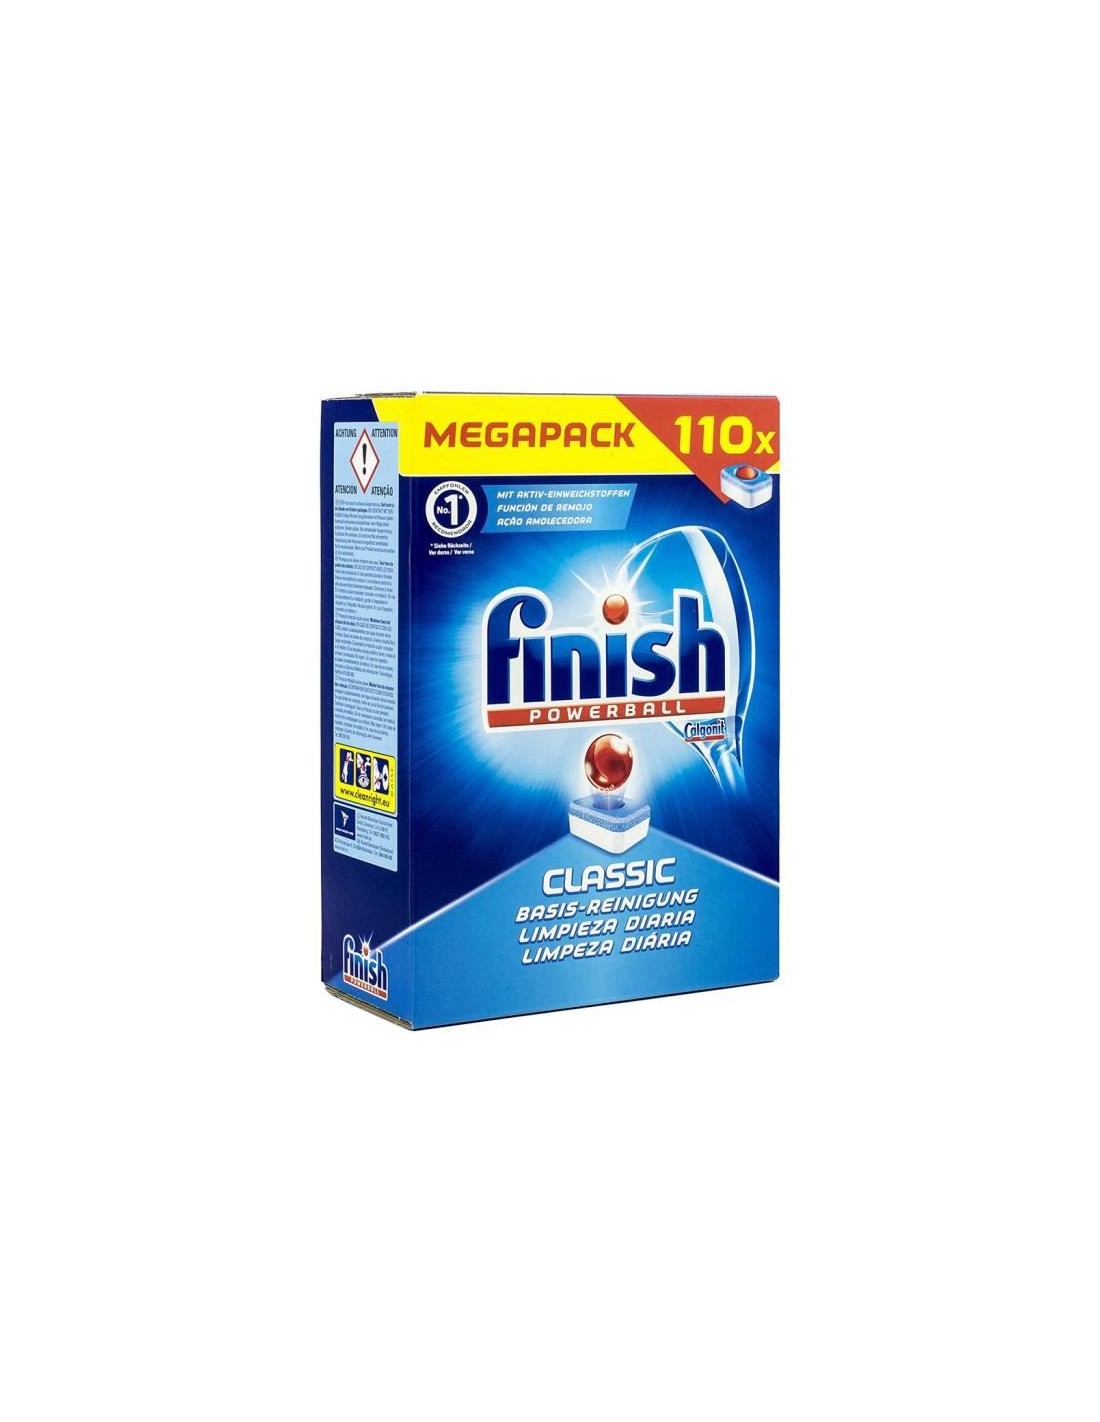 Finish tablette classic everiday lave vaisselle 110 tablettes